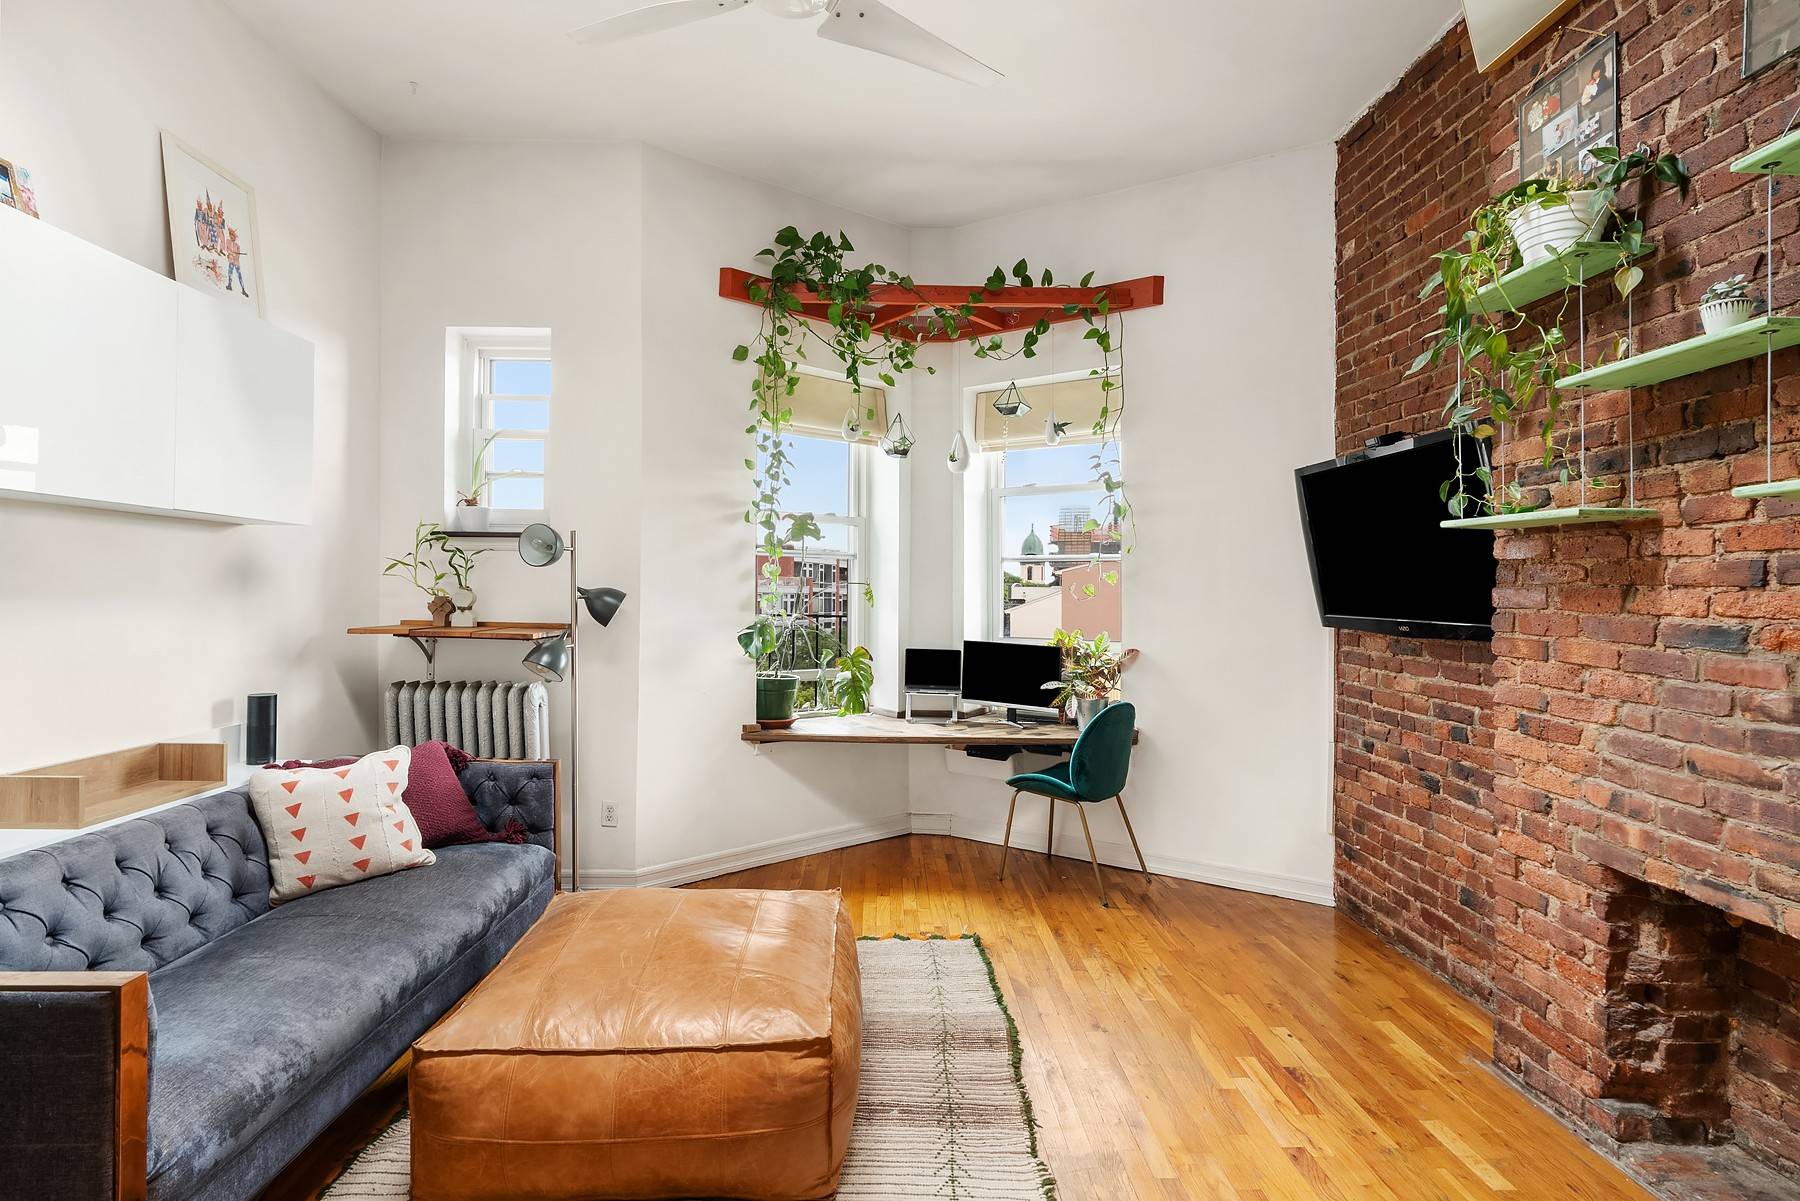 You will fall in love with this incredibly charming, sun drenched apartment with exclusive roof rights in the heart of Prospect Heights.